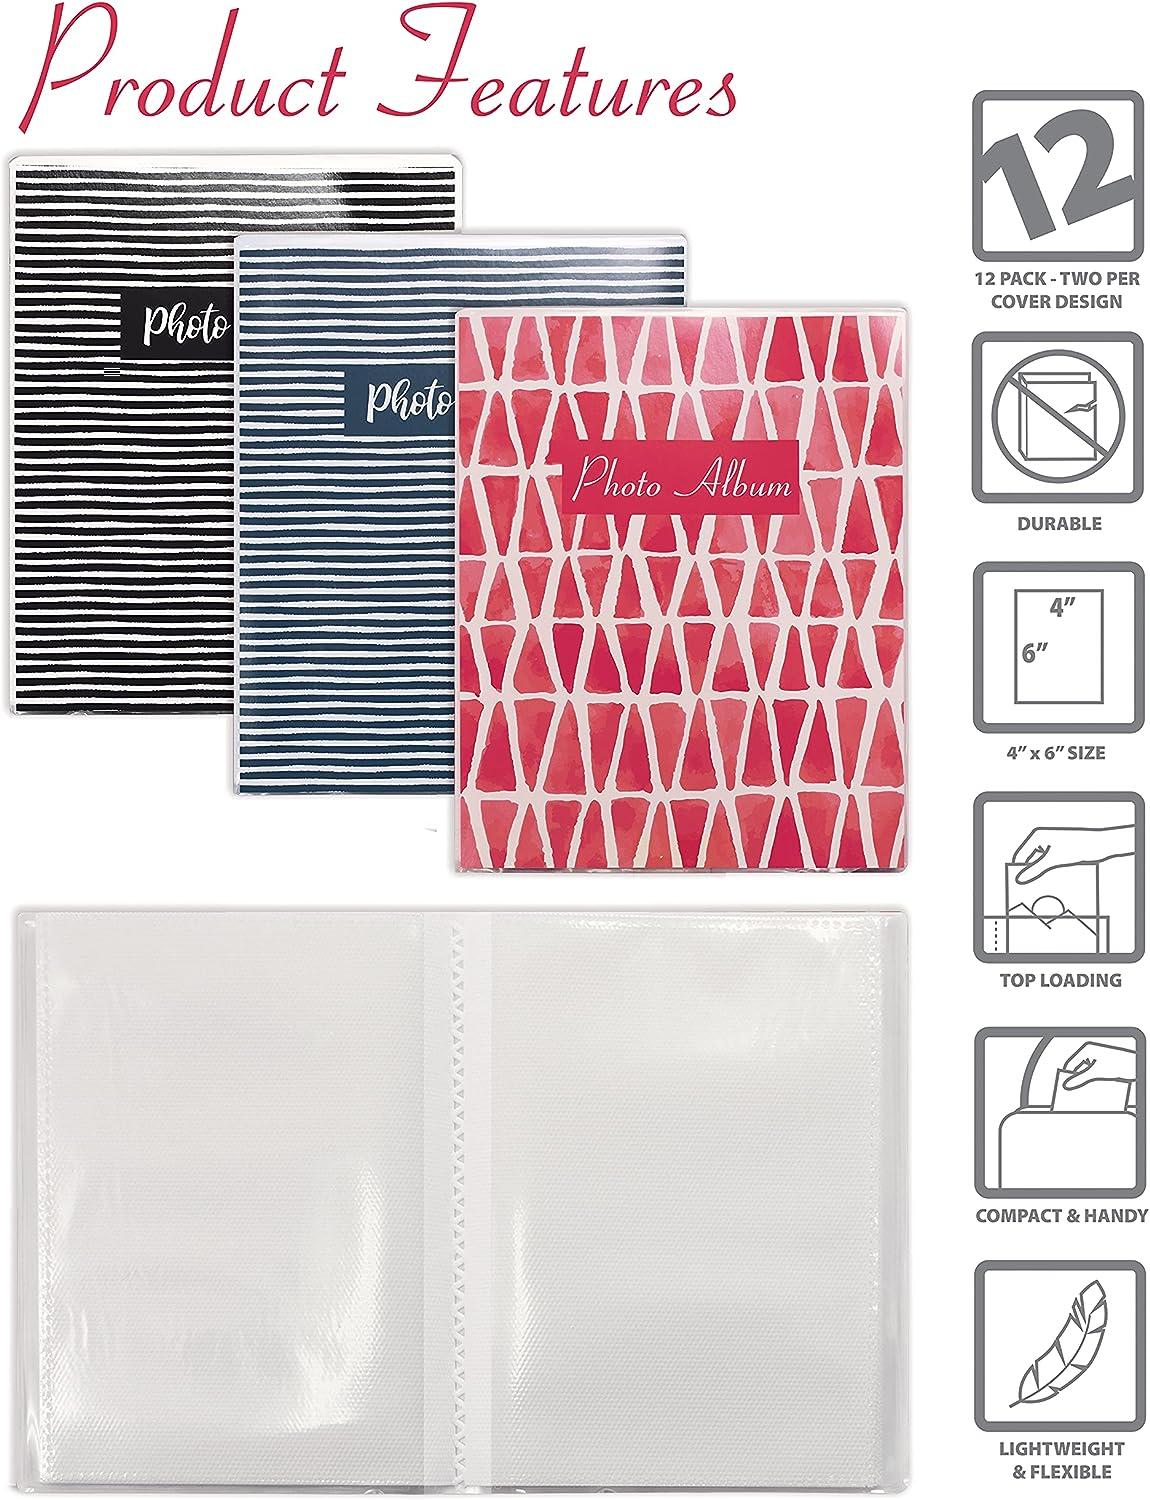 Polypropylene Photo Album Pages- 4 x 5 in.